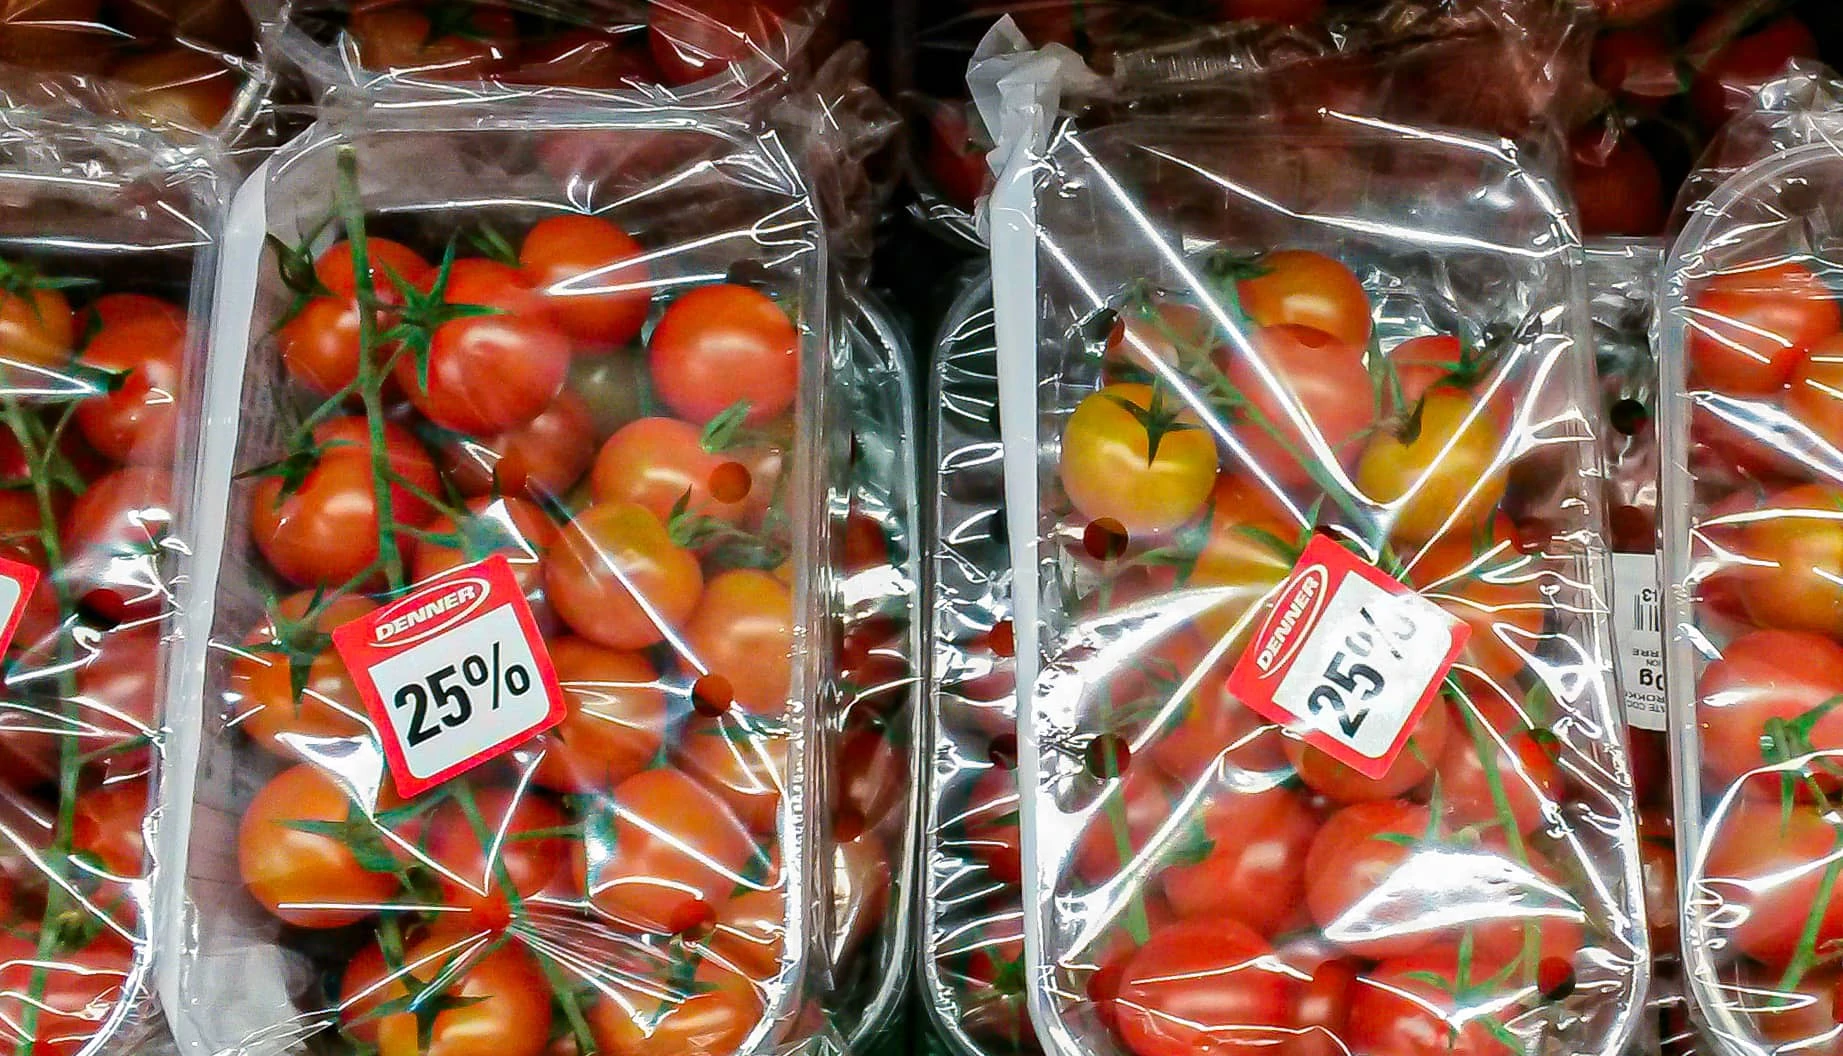 Cherry tomatoes in packs from Denner